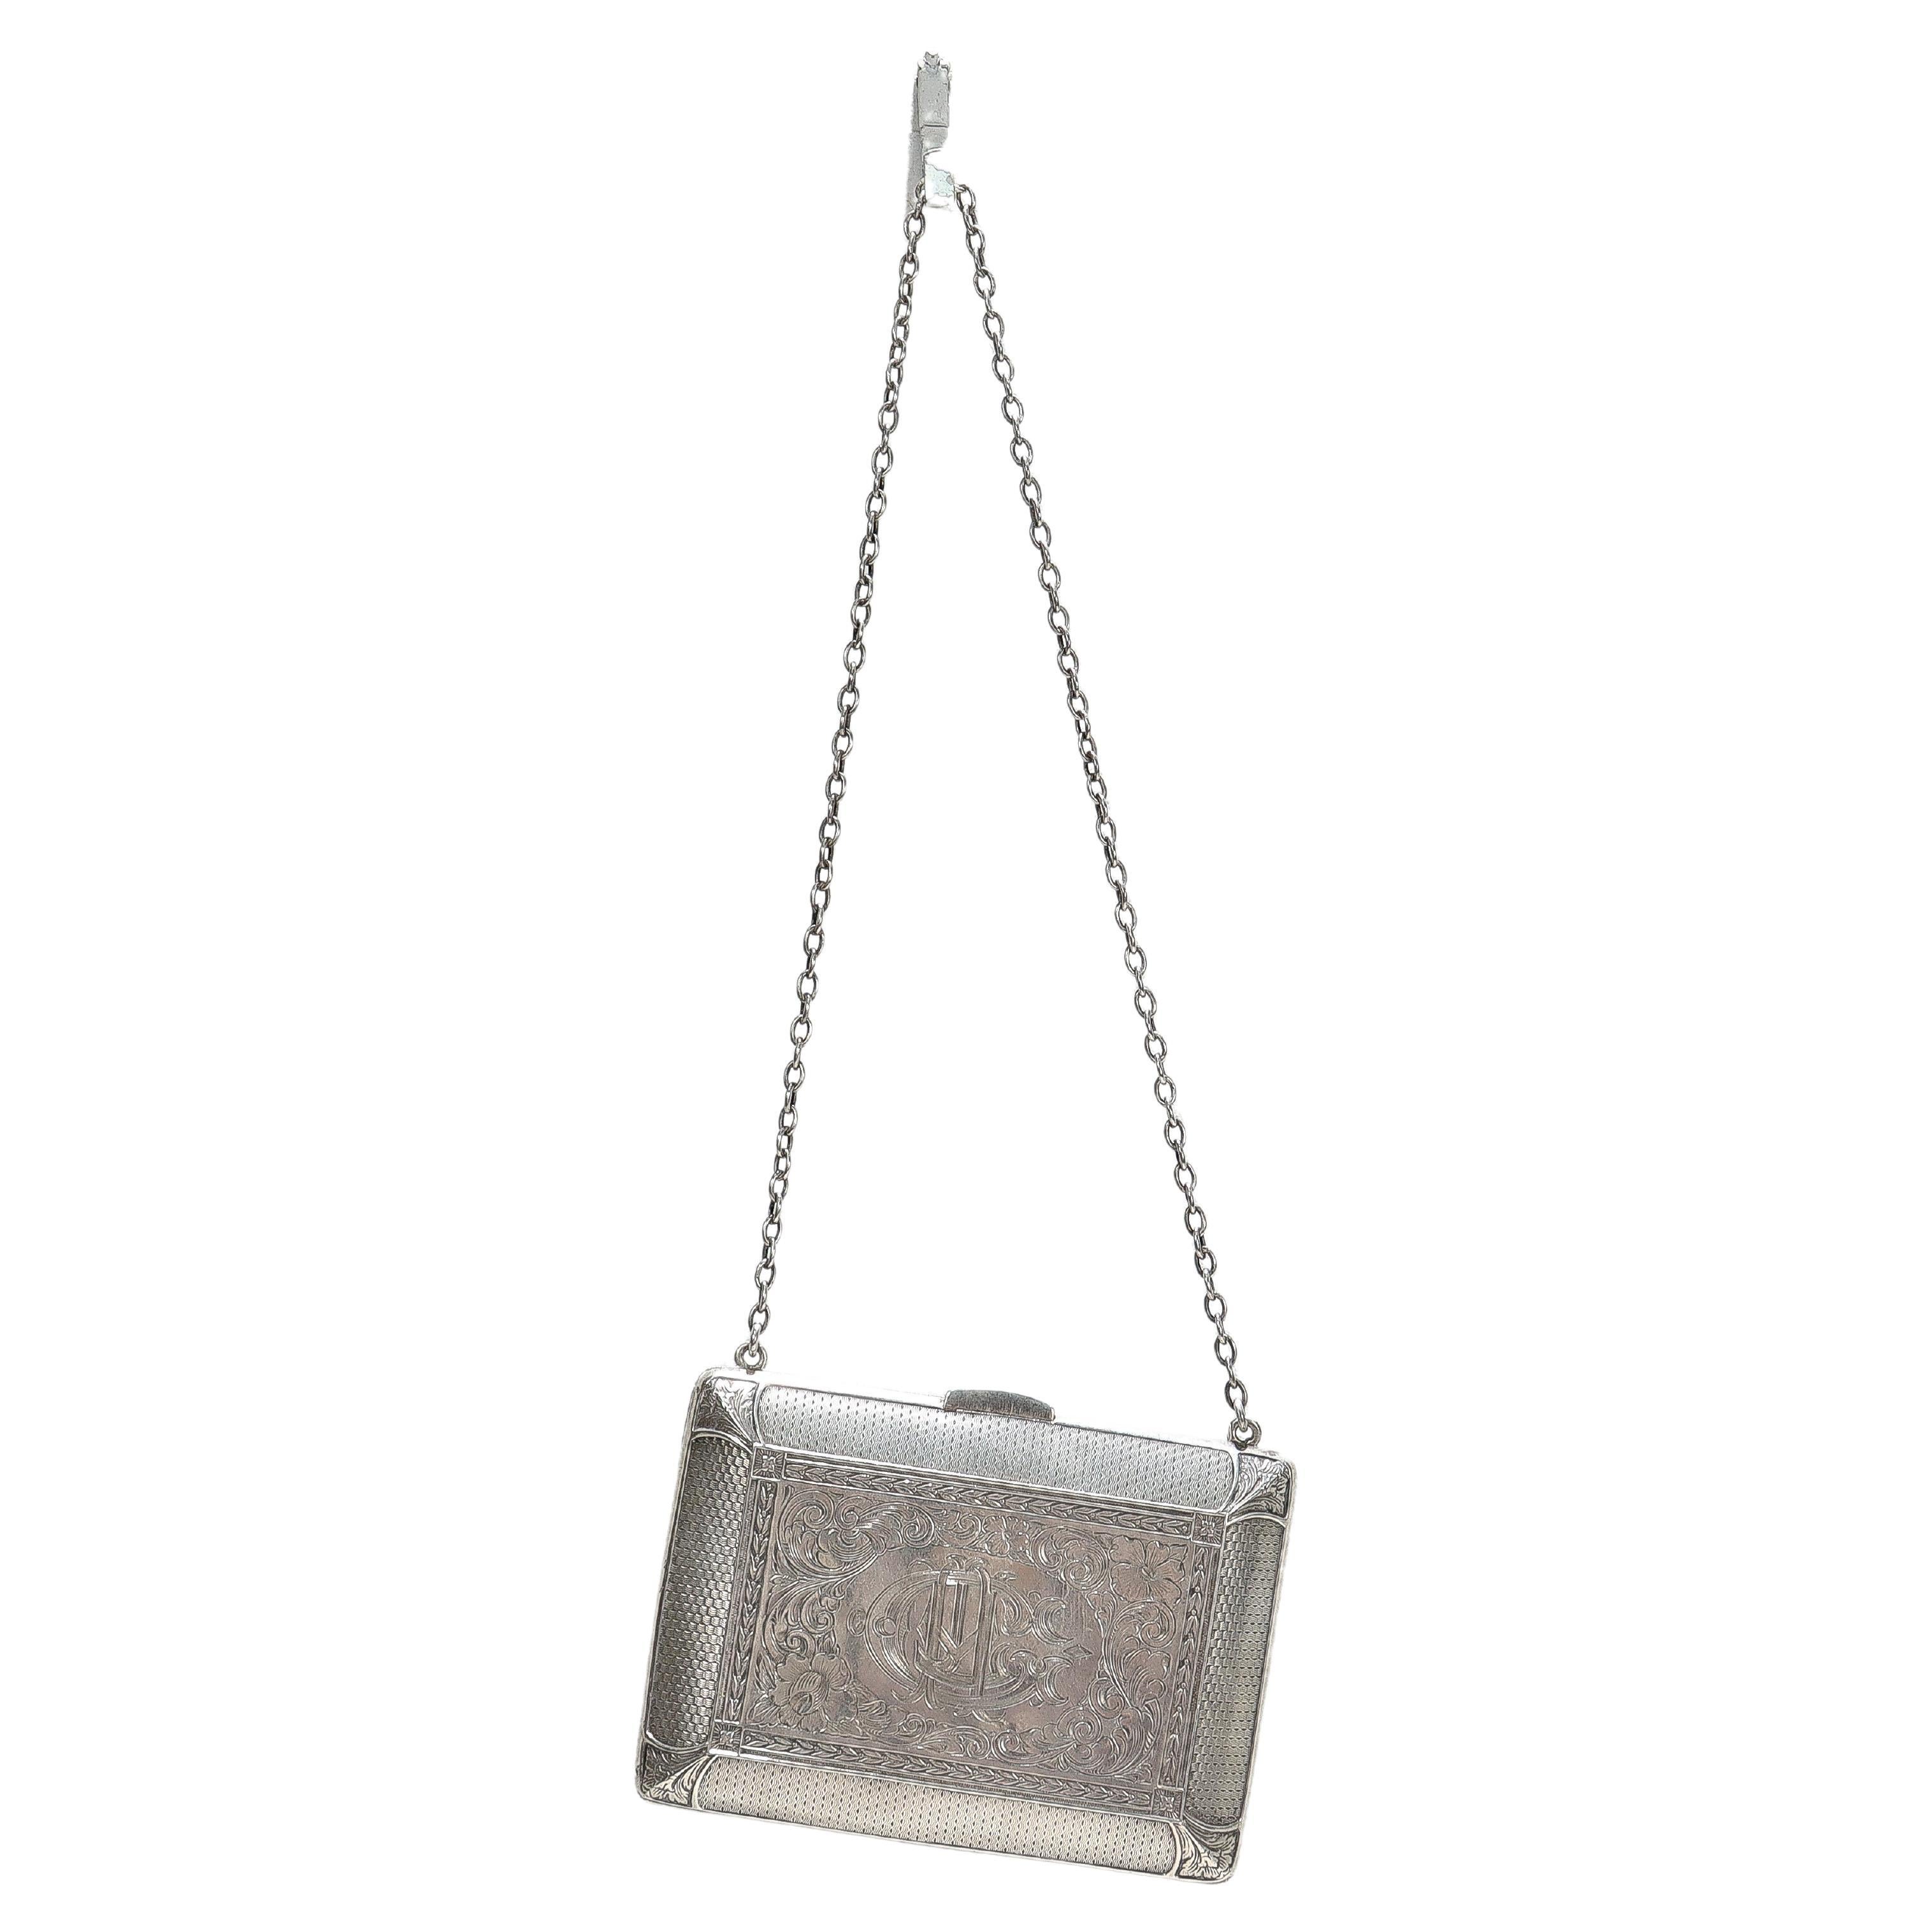 A fine antique Edwardian purse or evening bag.

In sterling silver.

By William B. Kerr & Co.

The purse has a small chain and opens with a button. The interior has two pockets on either side of a central locking pocket. 

Having panels of engraved